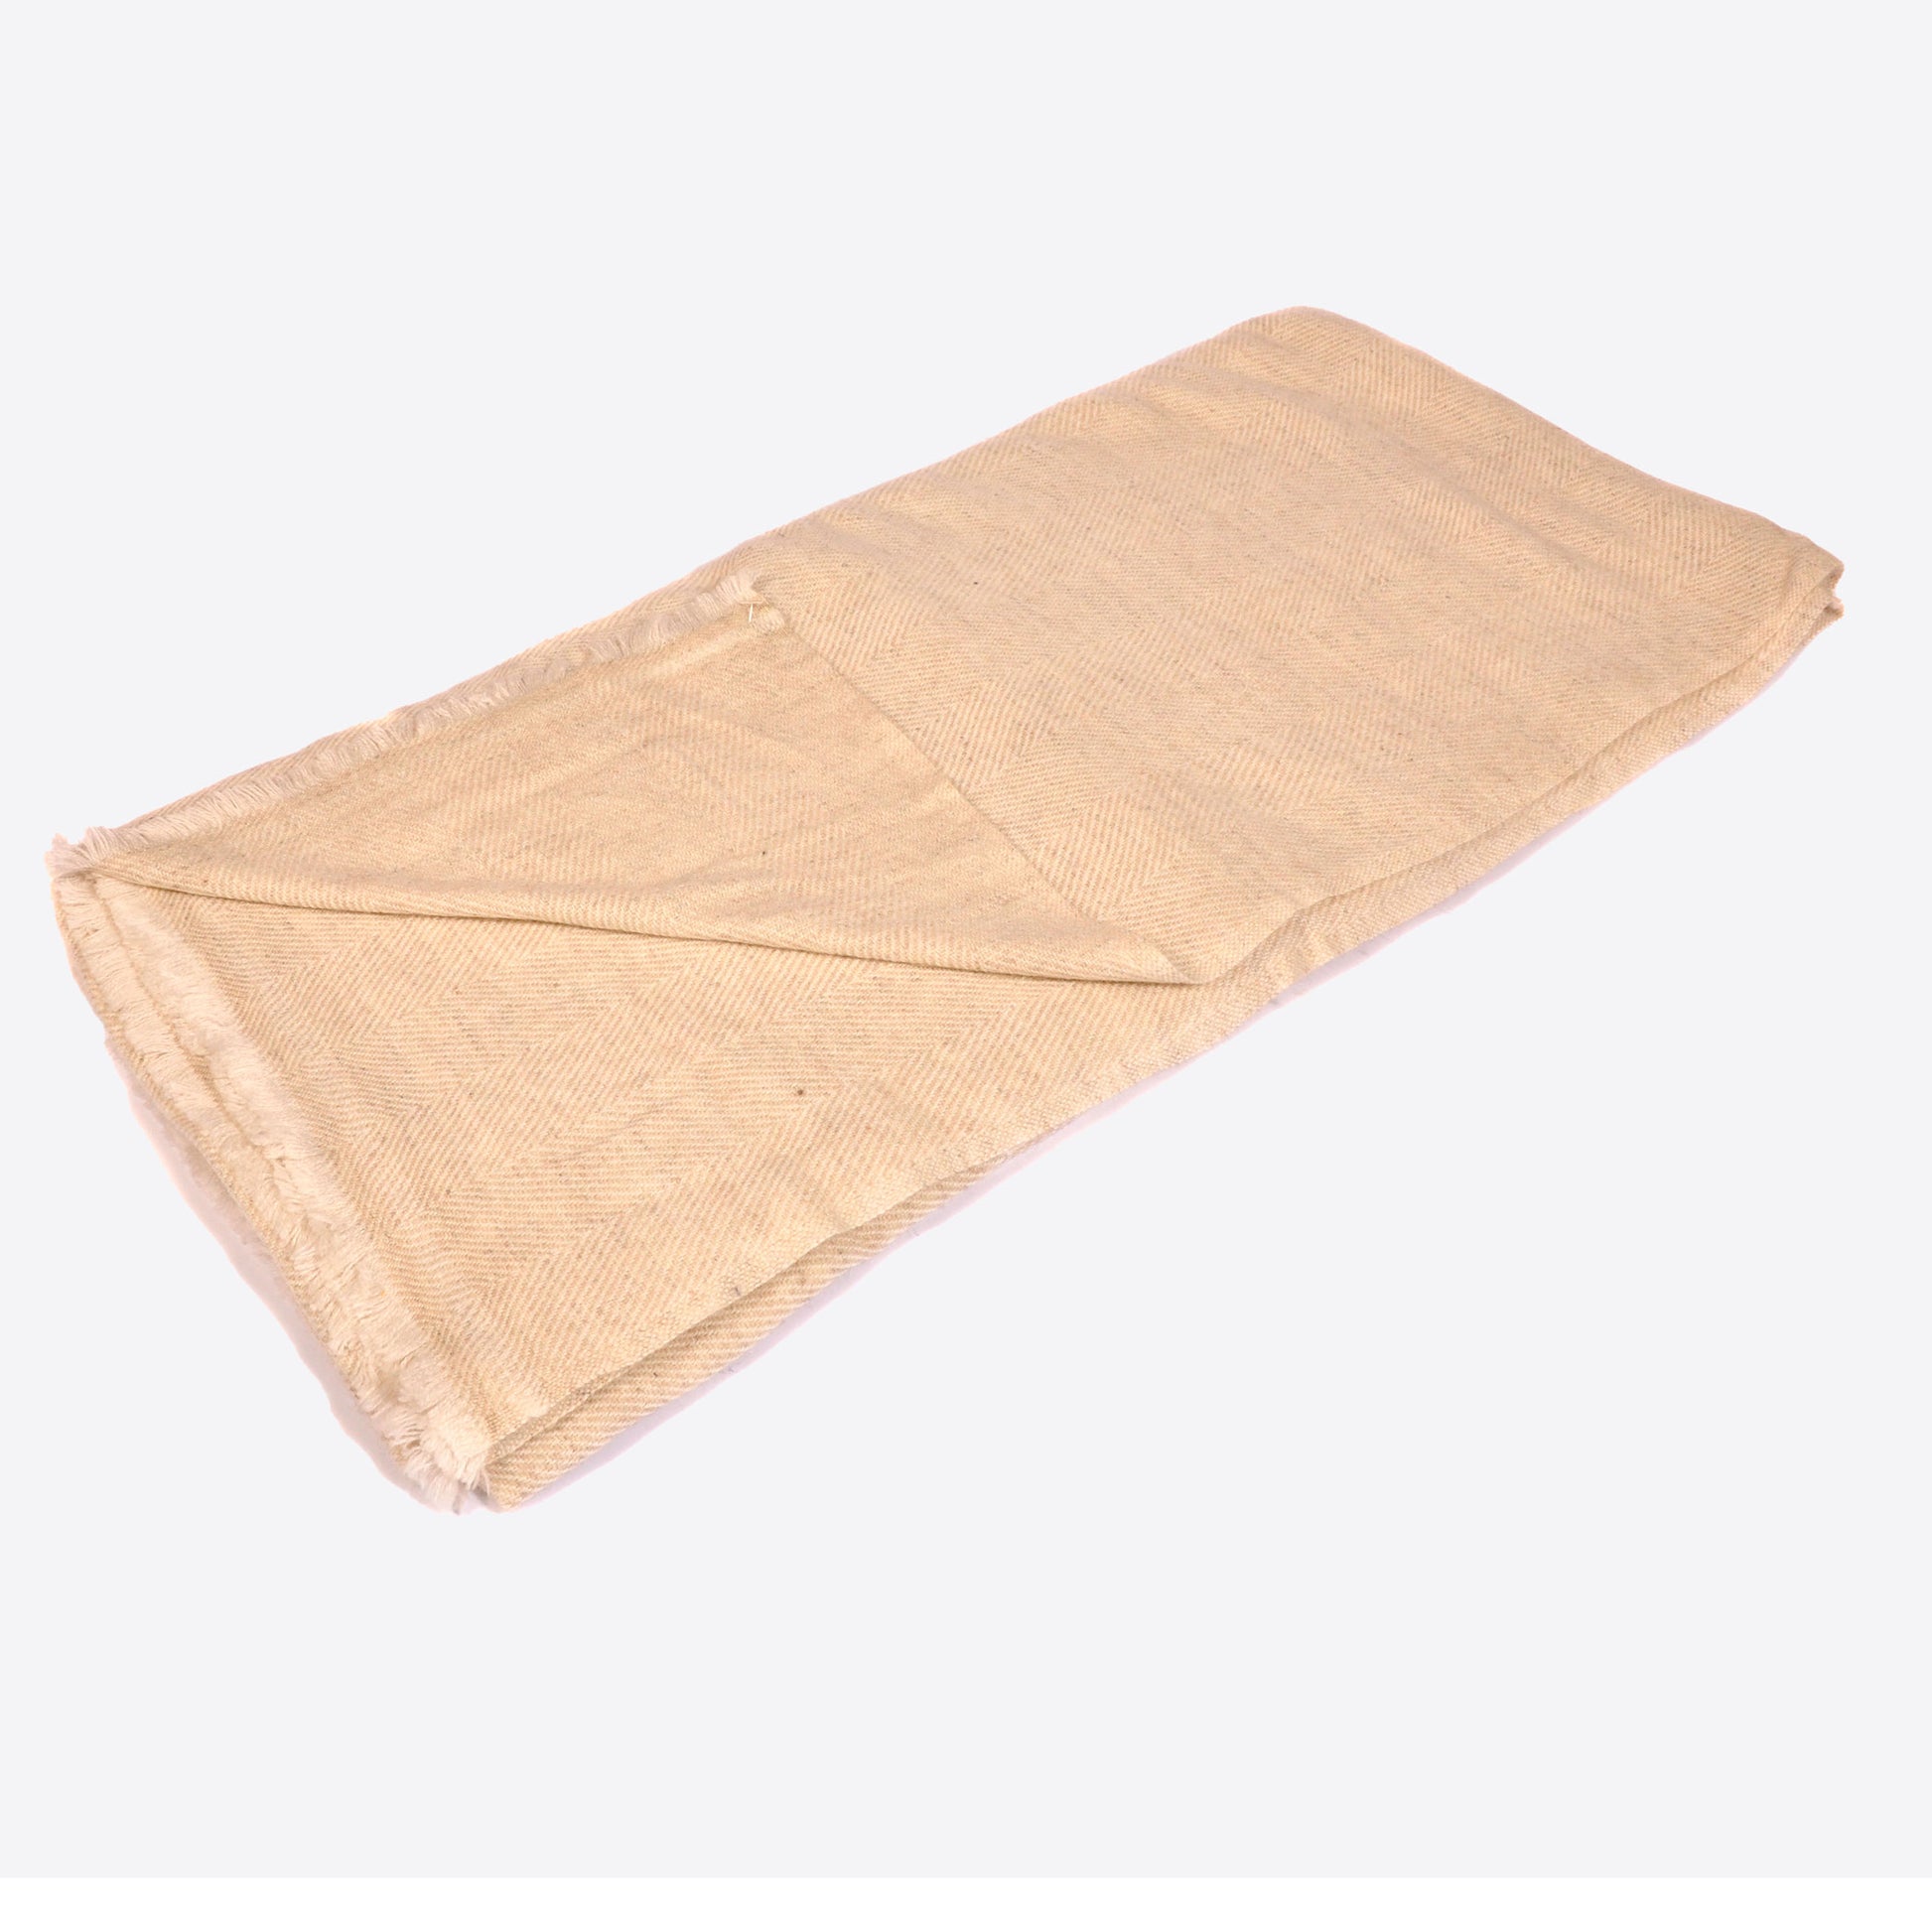 Oatmeal Cashmere Throw Not specified